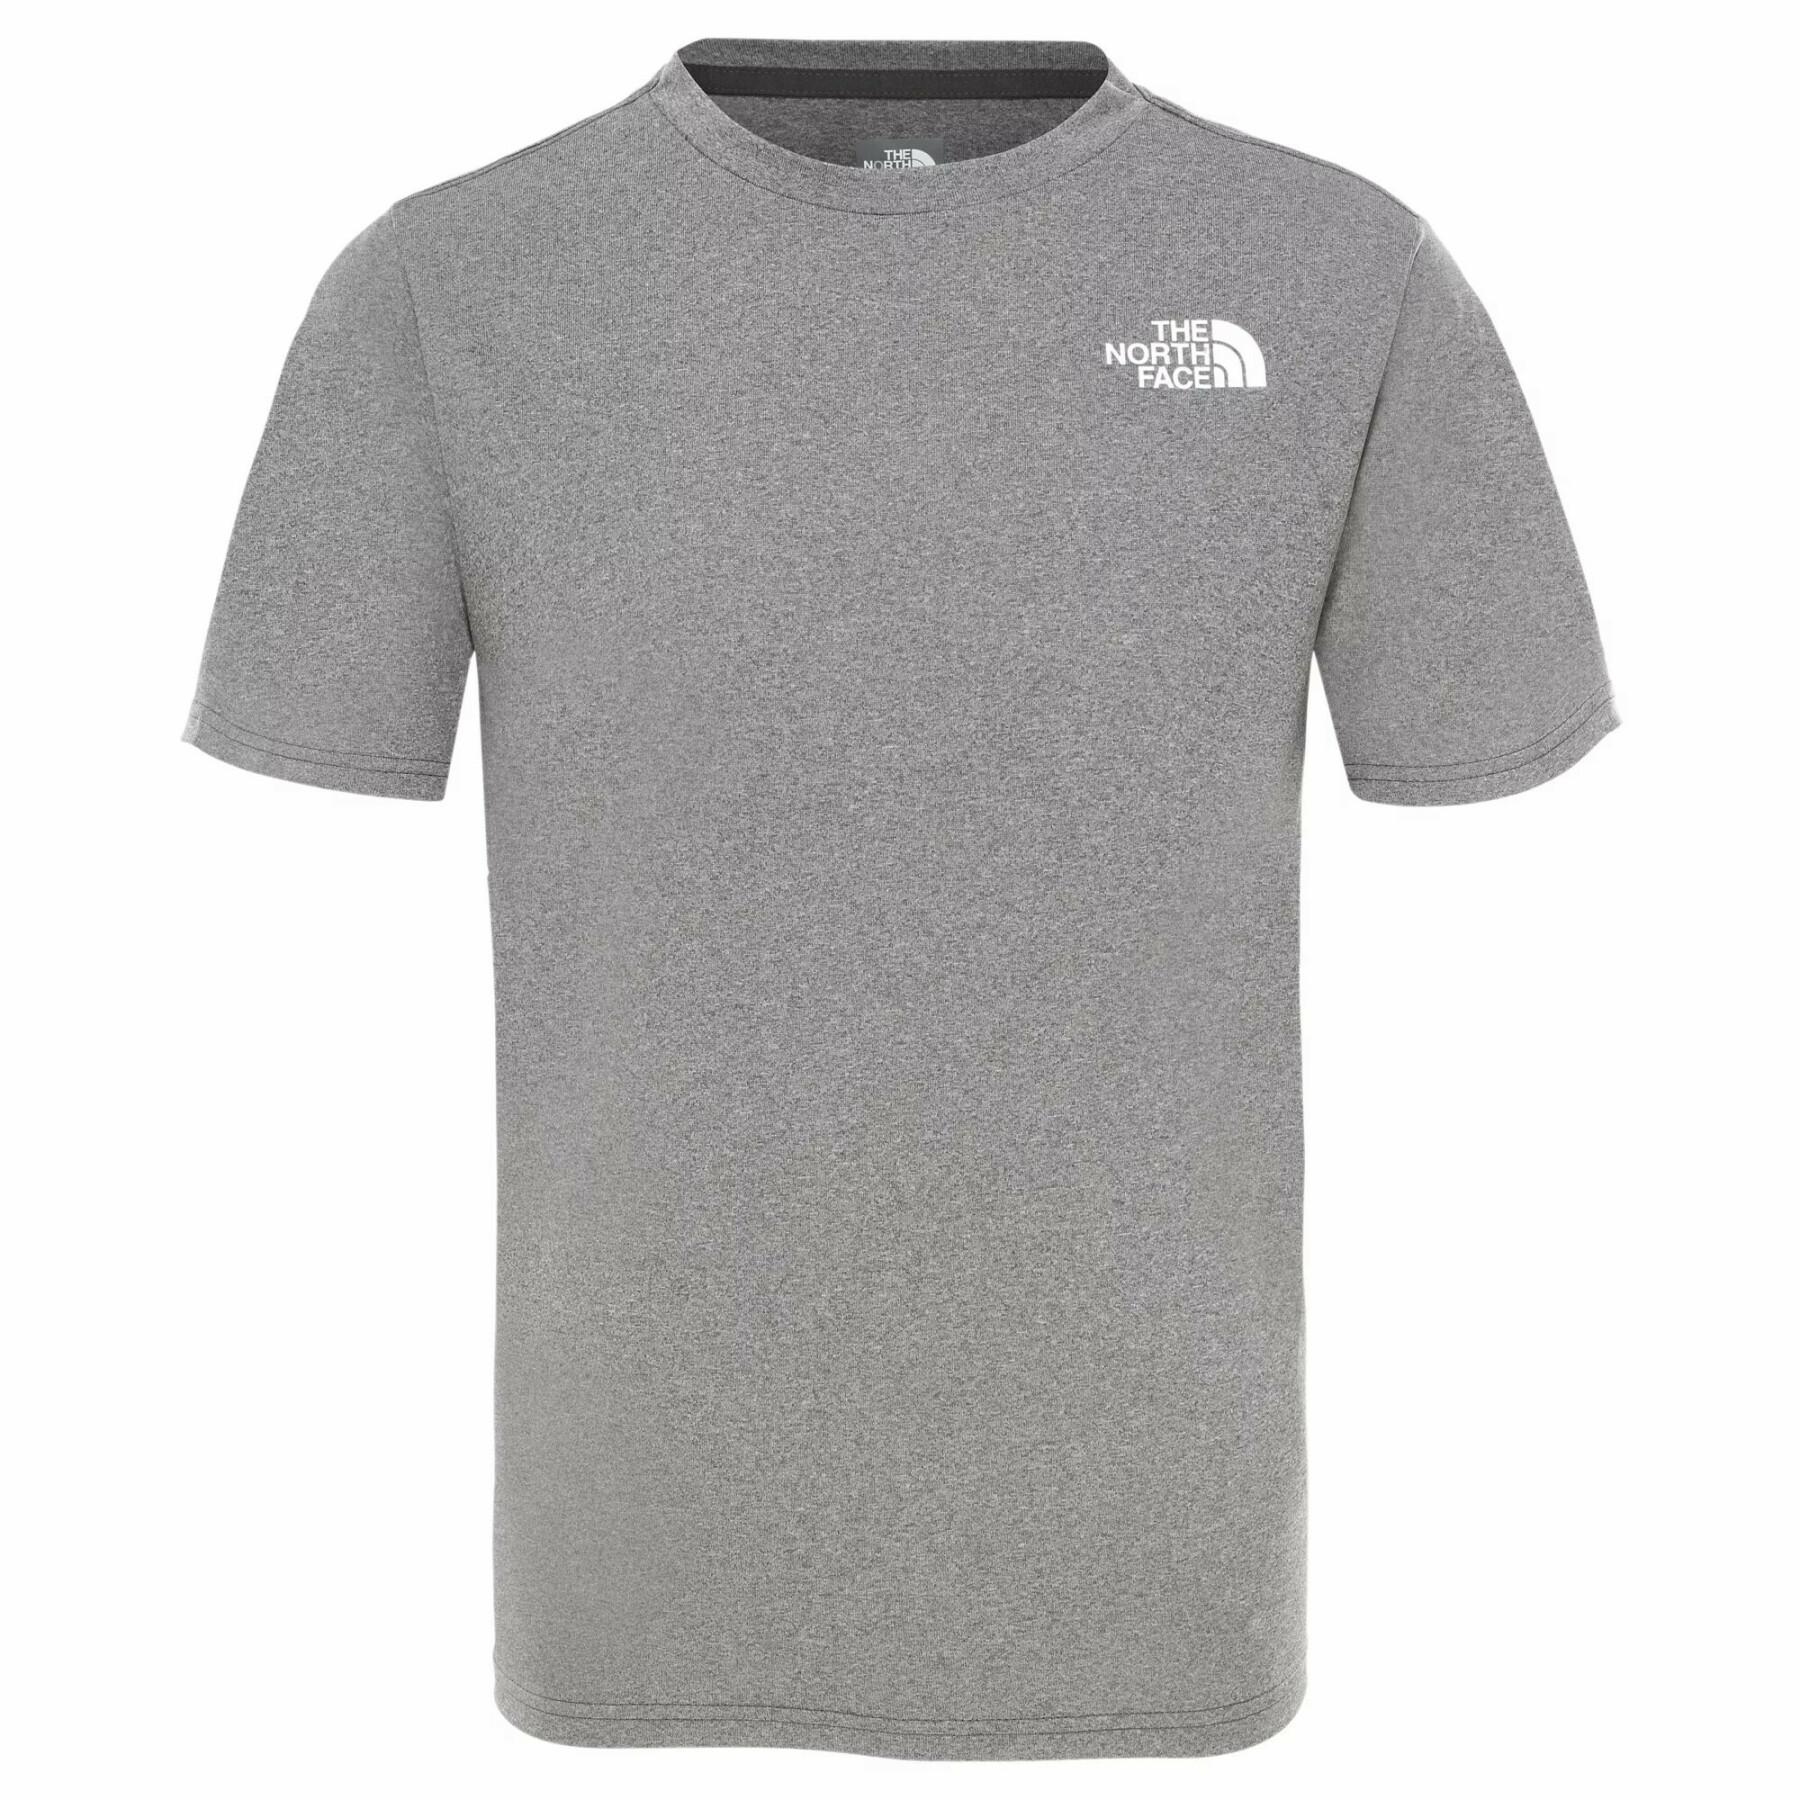 Kinder-T-Shirt The North Face Reaxion 2.0